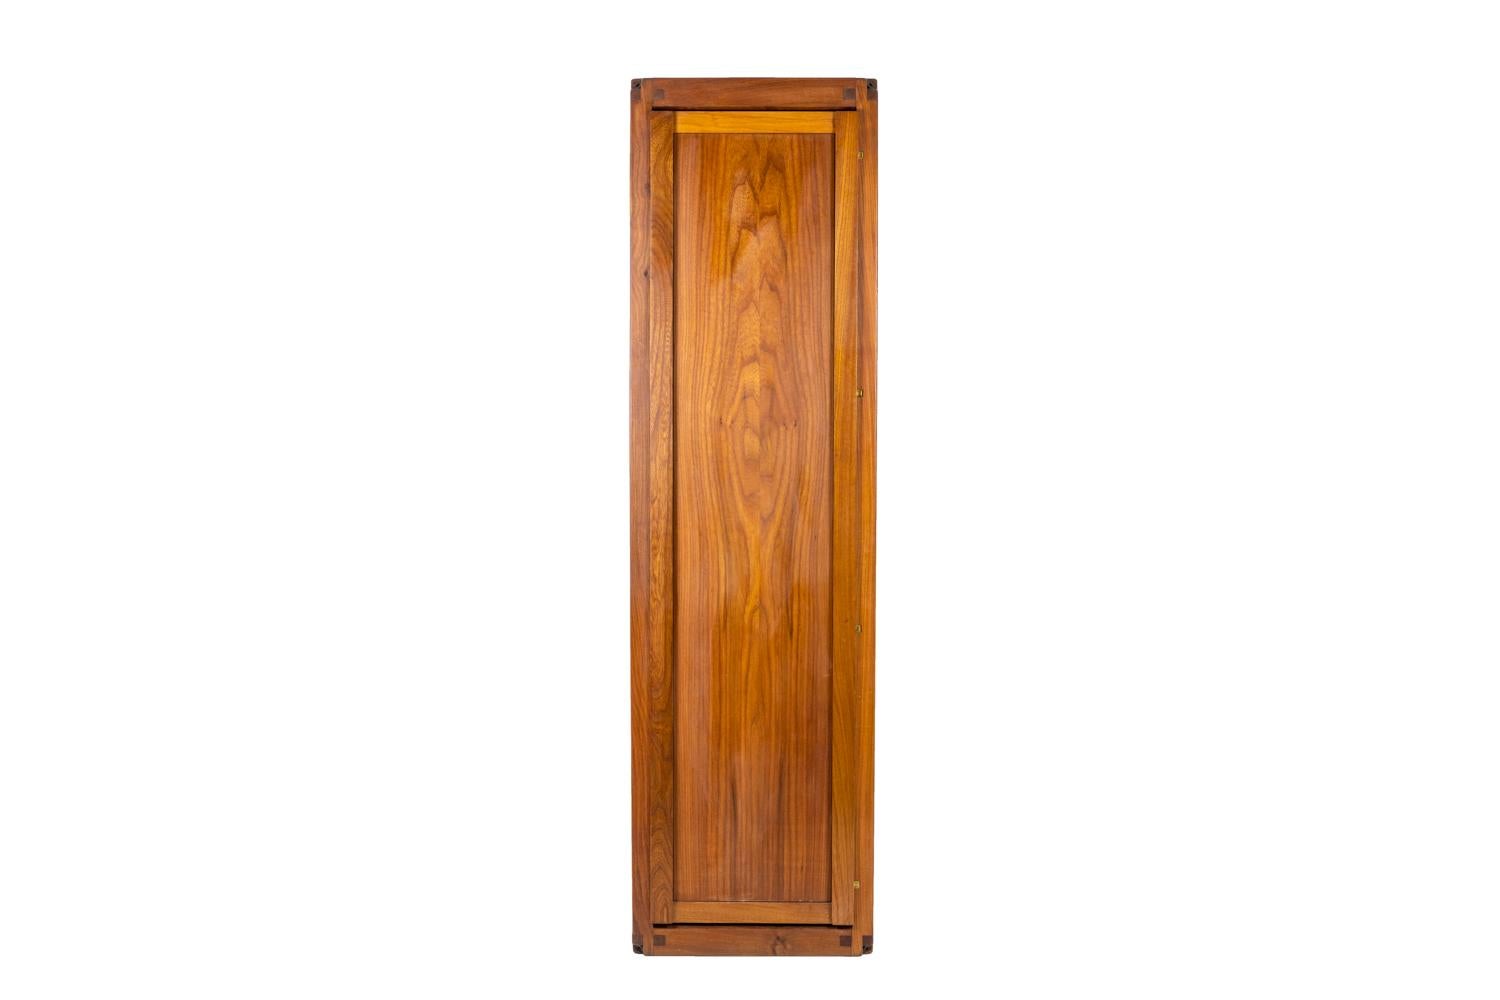 Natural Armoire - 4 For Sale on 1stDibs | natural wood armoire